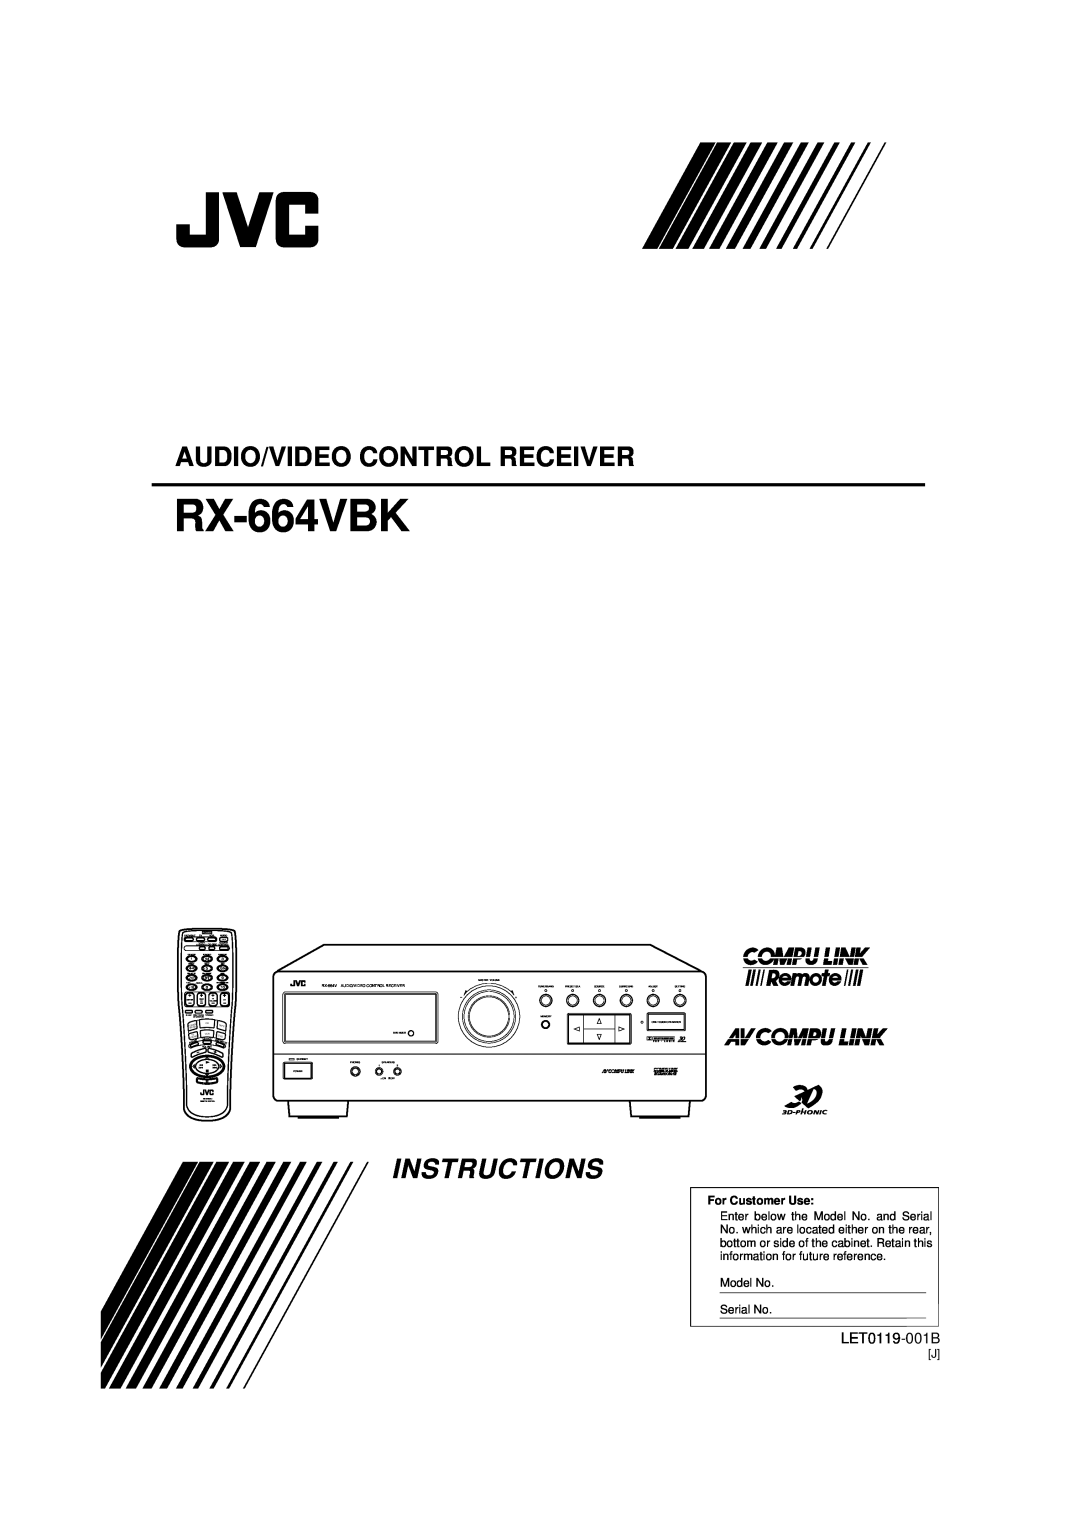 JVC RX-664VBK manual Audio/Video Control Receiver, Instructions, LET0119-001B, For Customer Use 